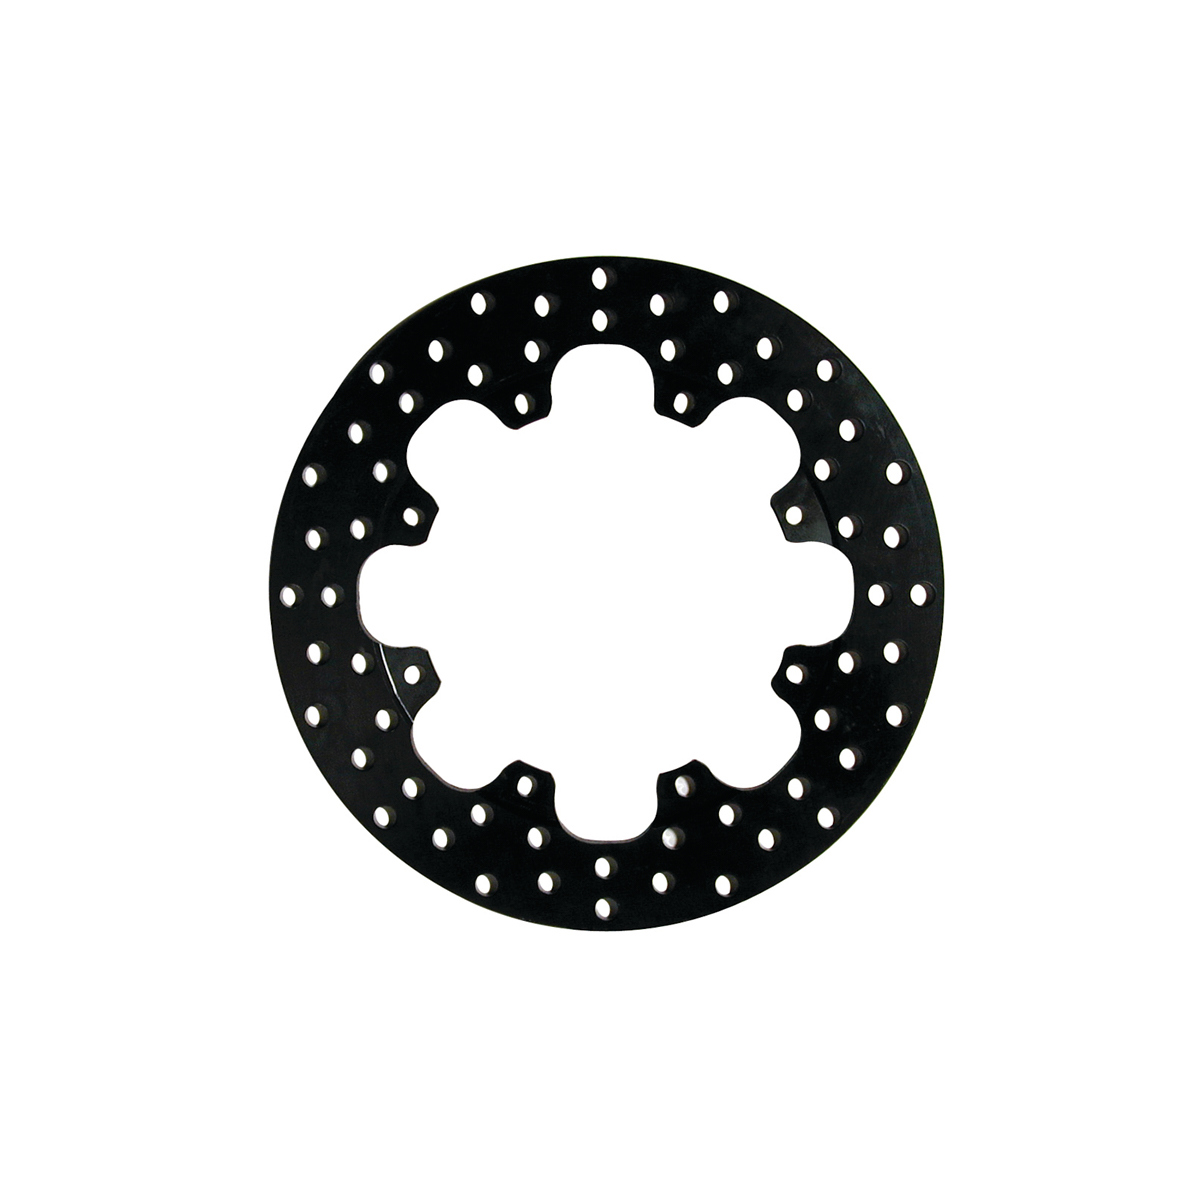 Wilwood 160-3202 Brake Rotor, Drilled, 11.75 in OD, 0.350 in Thick, 8 x 7.000 in Bolt Pattern, Steel, Black Paint, Each